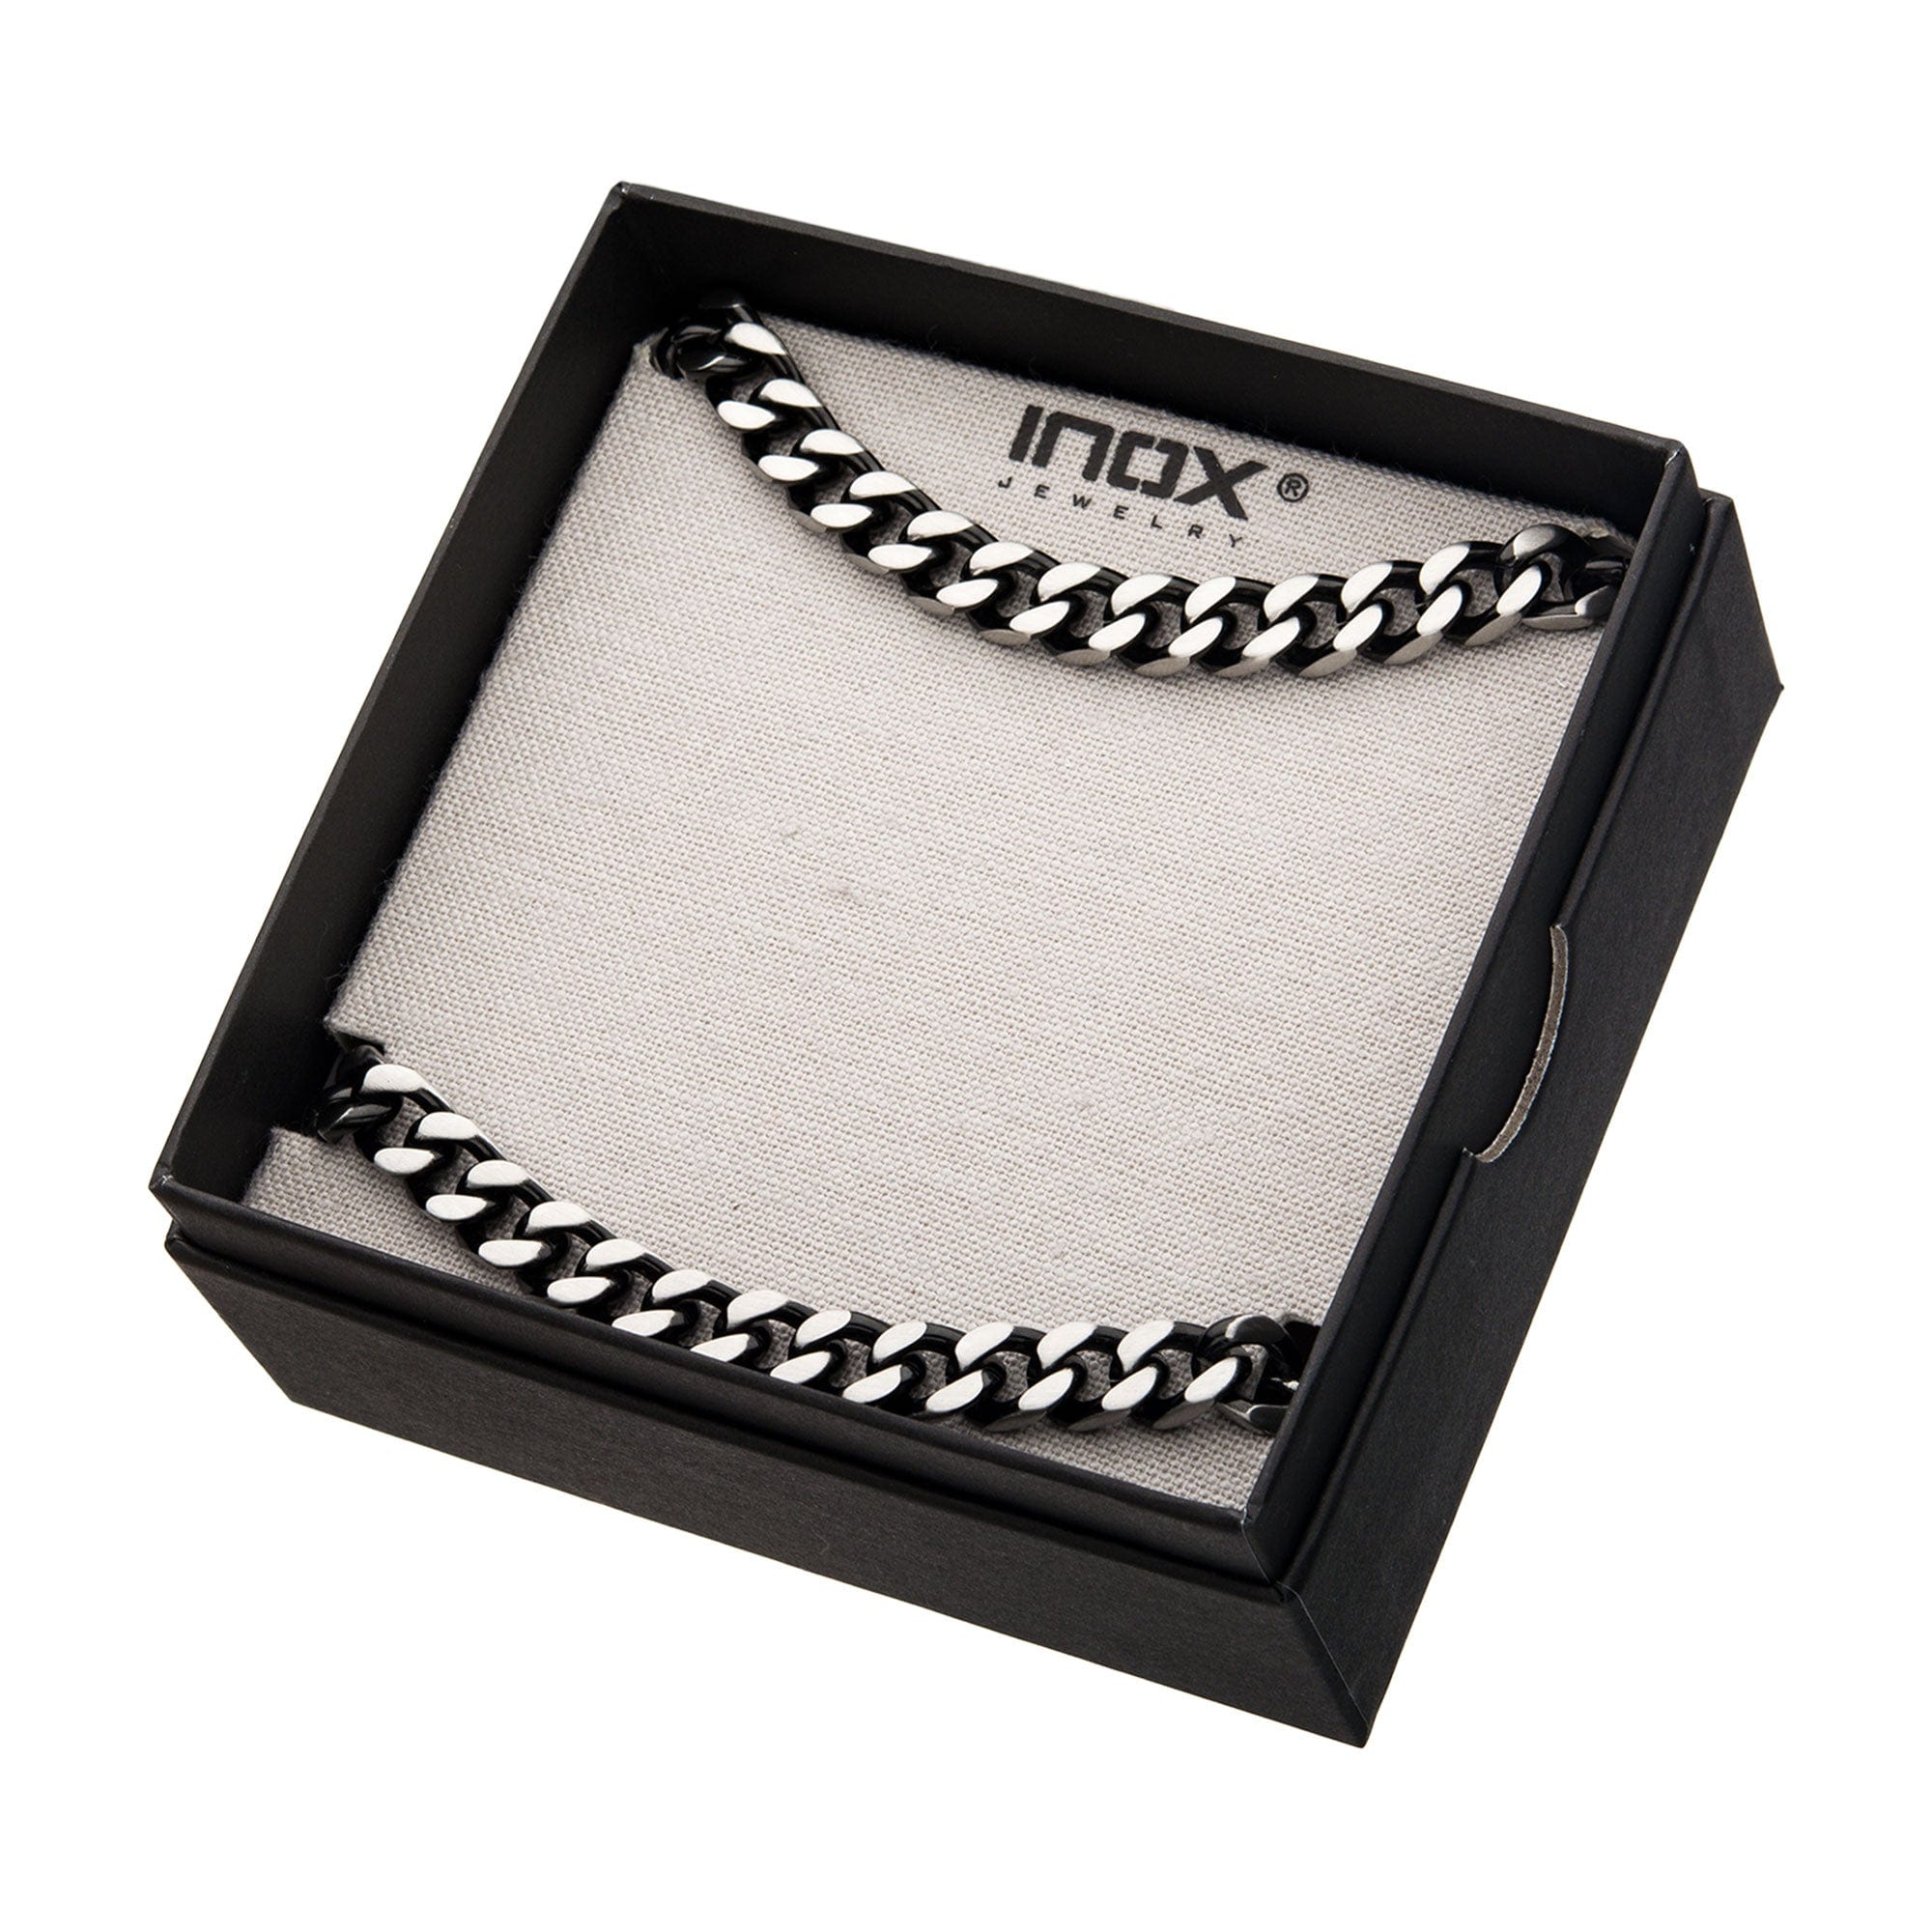 INOX JEWELRY Chains Black and Silver Tone Stainless Steel 8mm Brushed Curb Chain and Bracelet Set NSTC1208-SET